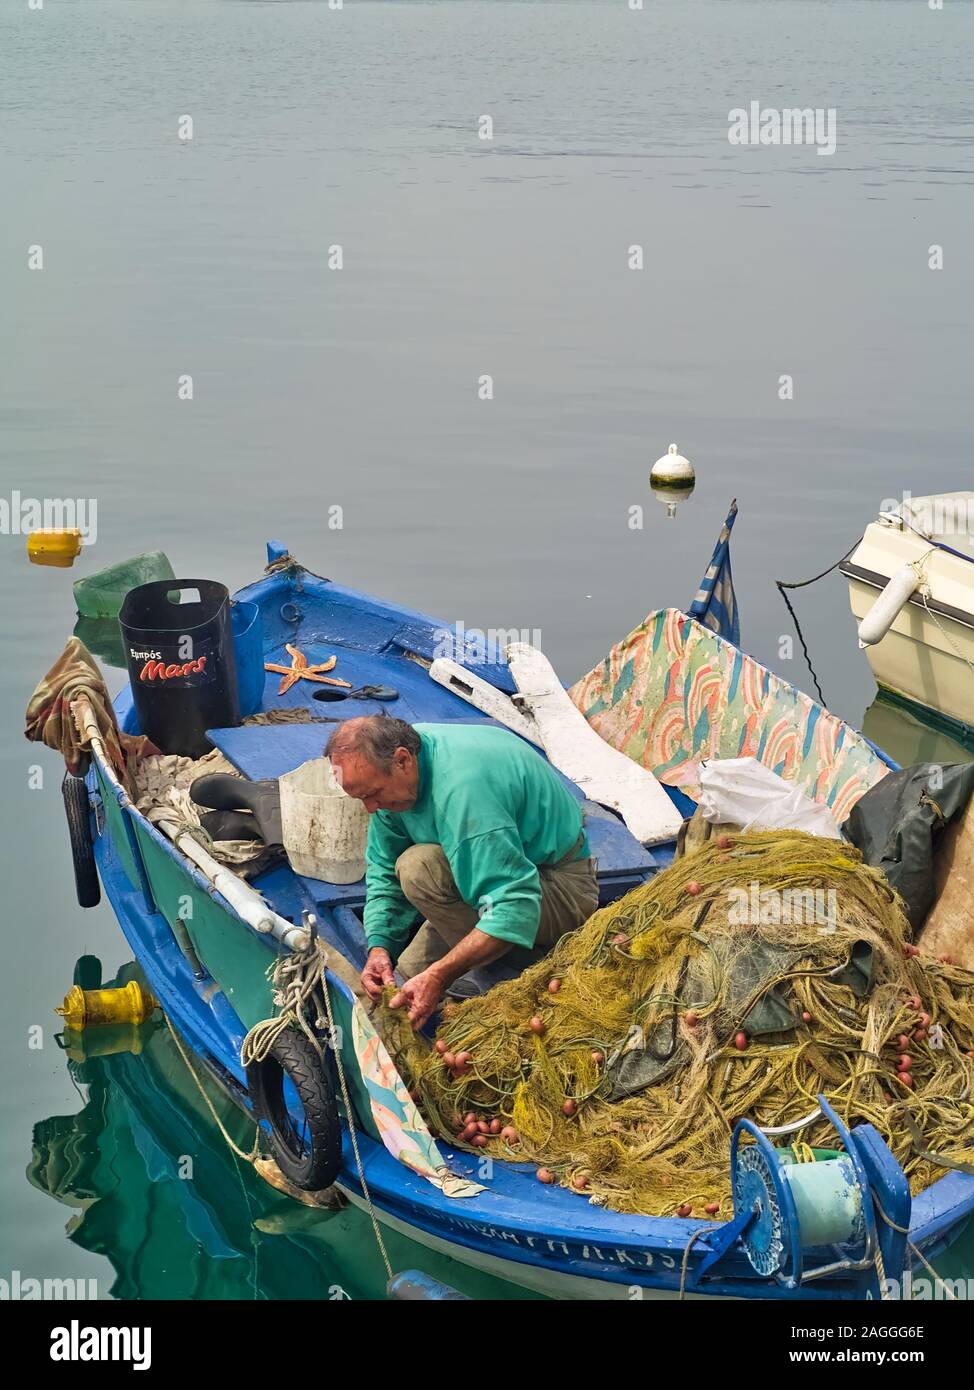 Kavala, Macedonia / Greece - May 14, 2019: Fisherman working on his fishing nets in traditional weathered blue wooden boat in the port of Kavala. Stock Photo